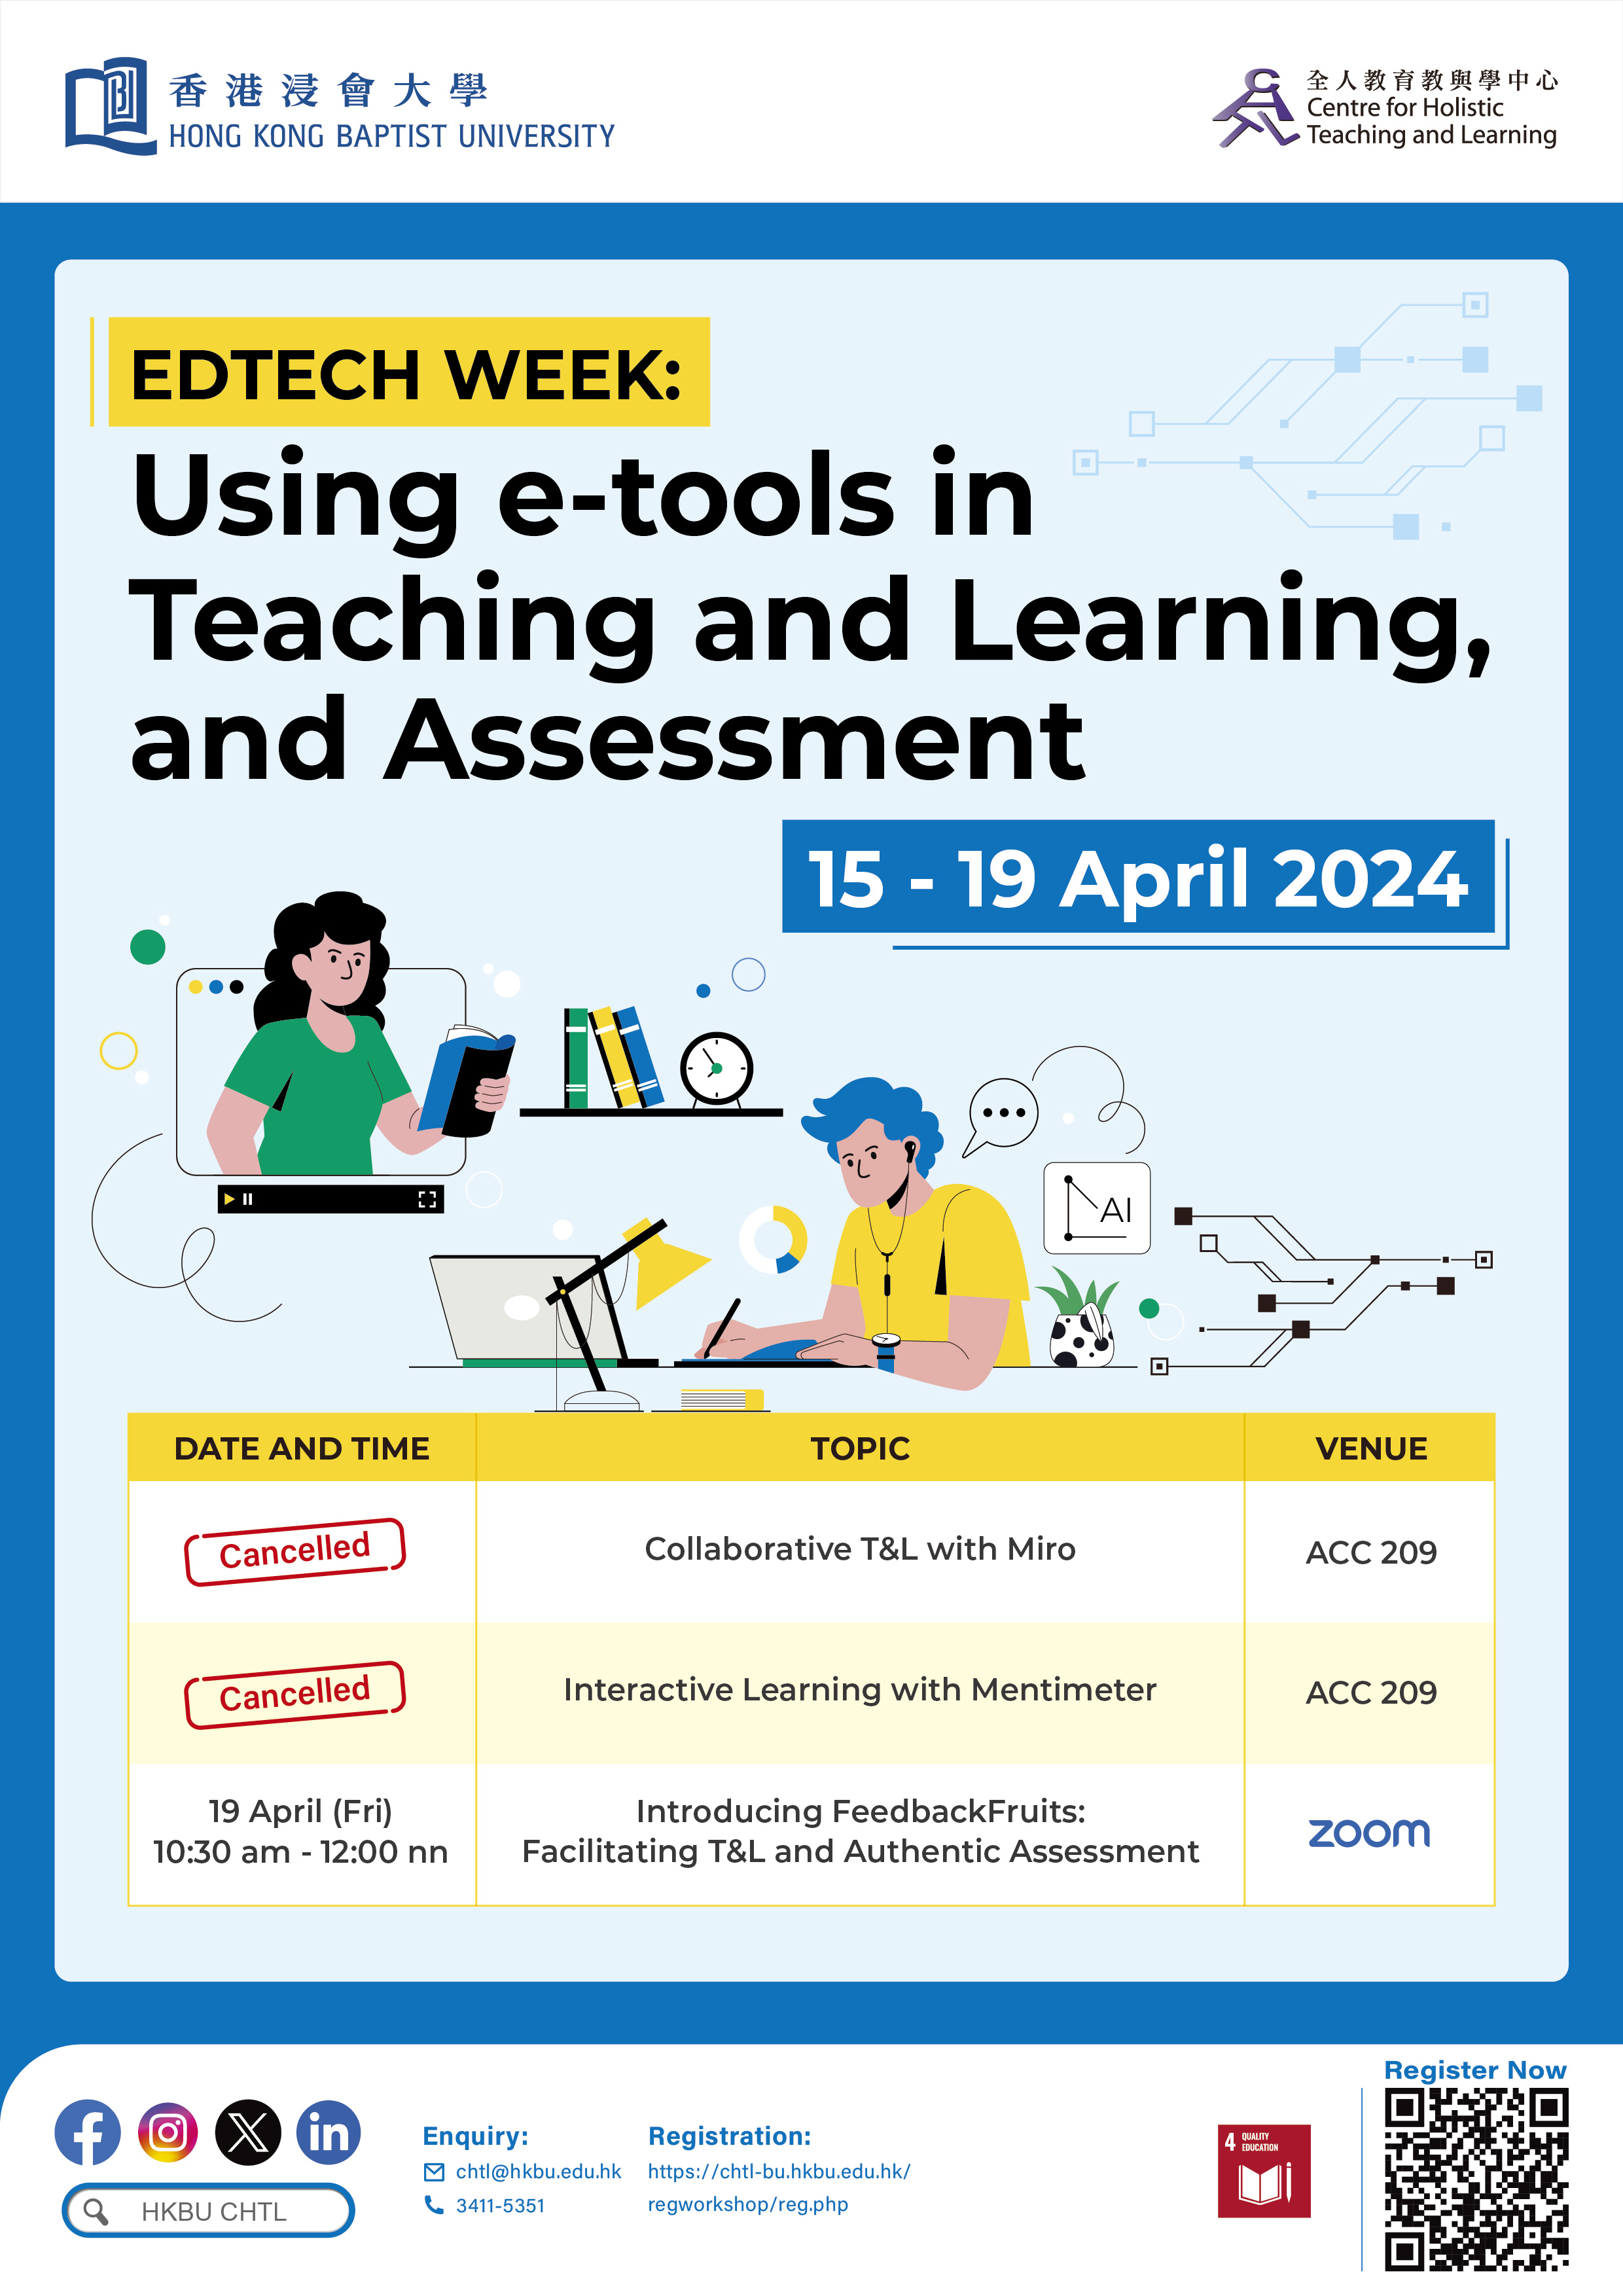 EDTECH WEEK: Using e-tools in Teaching and Learning, and Assessment